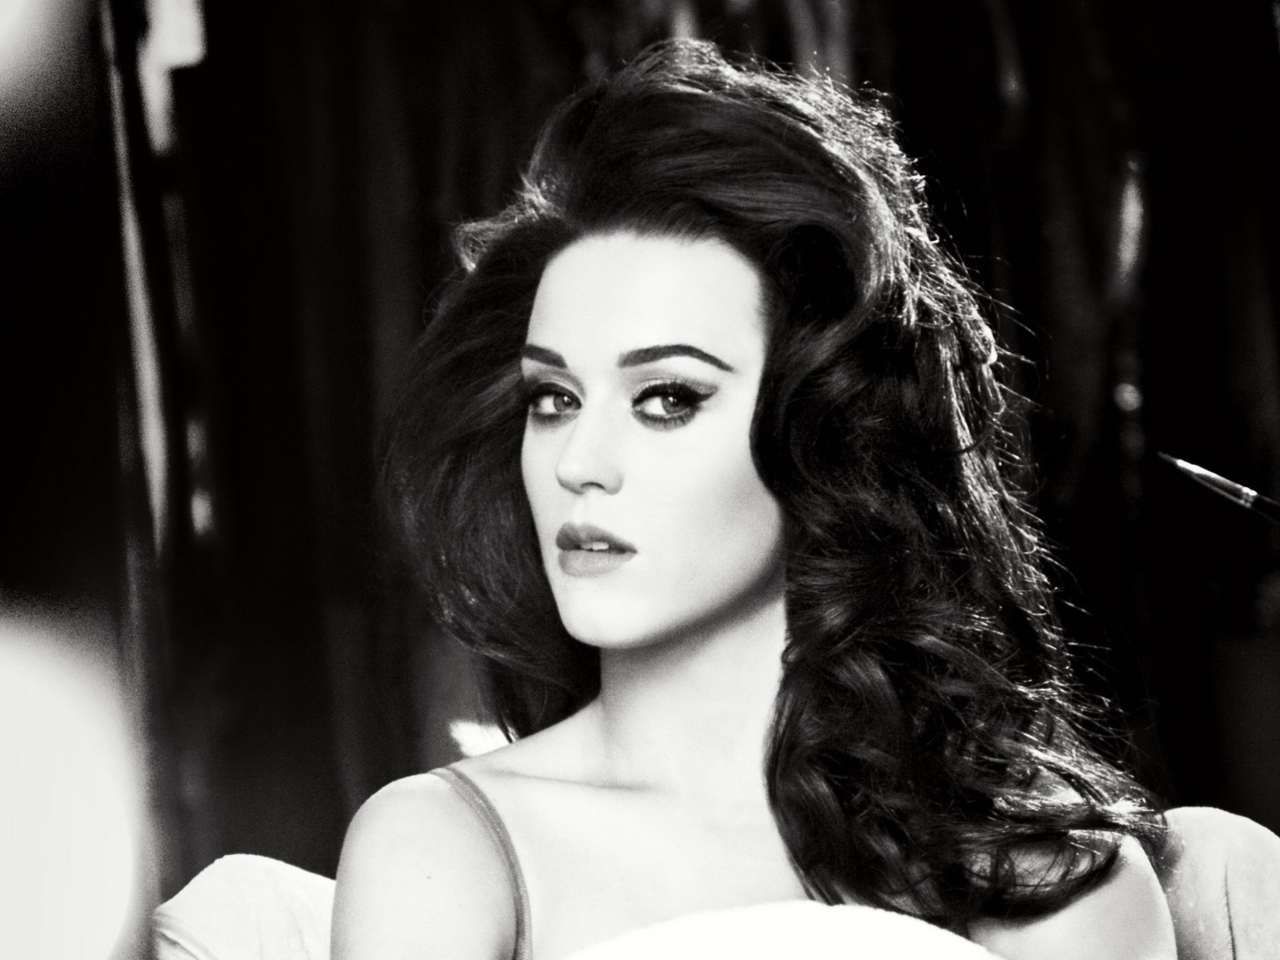 Katy Perry Black And White wallpaper 1280x960